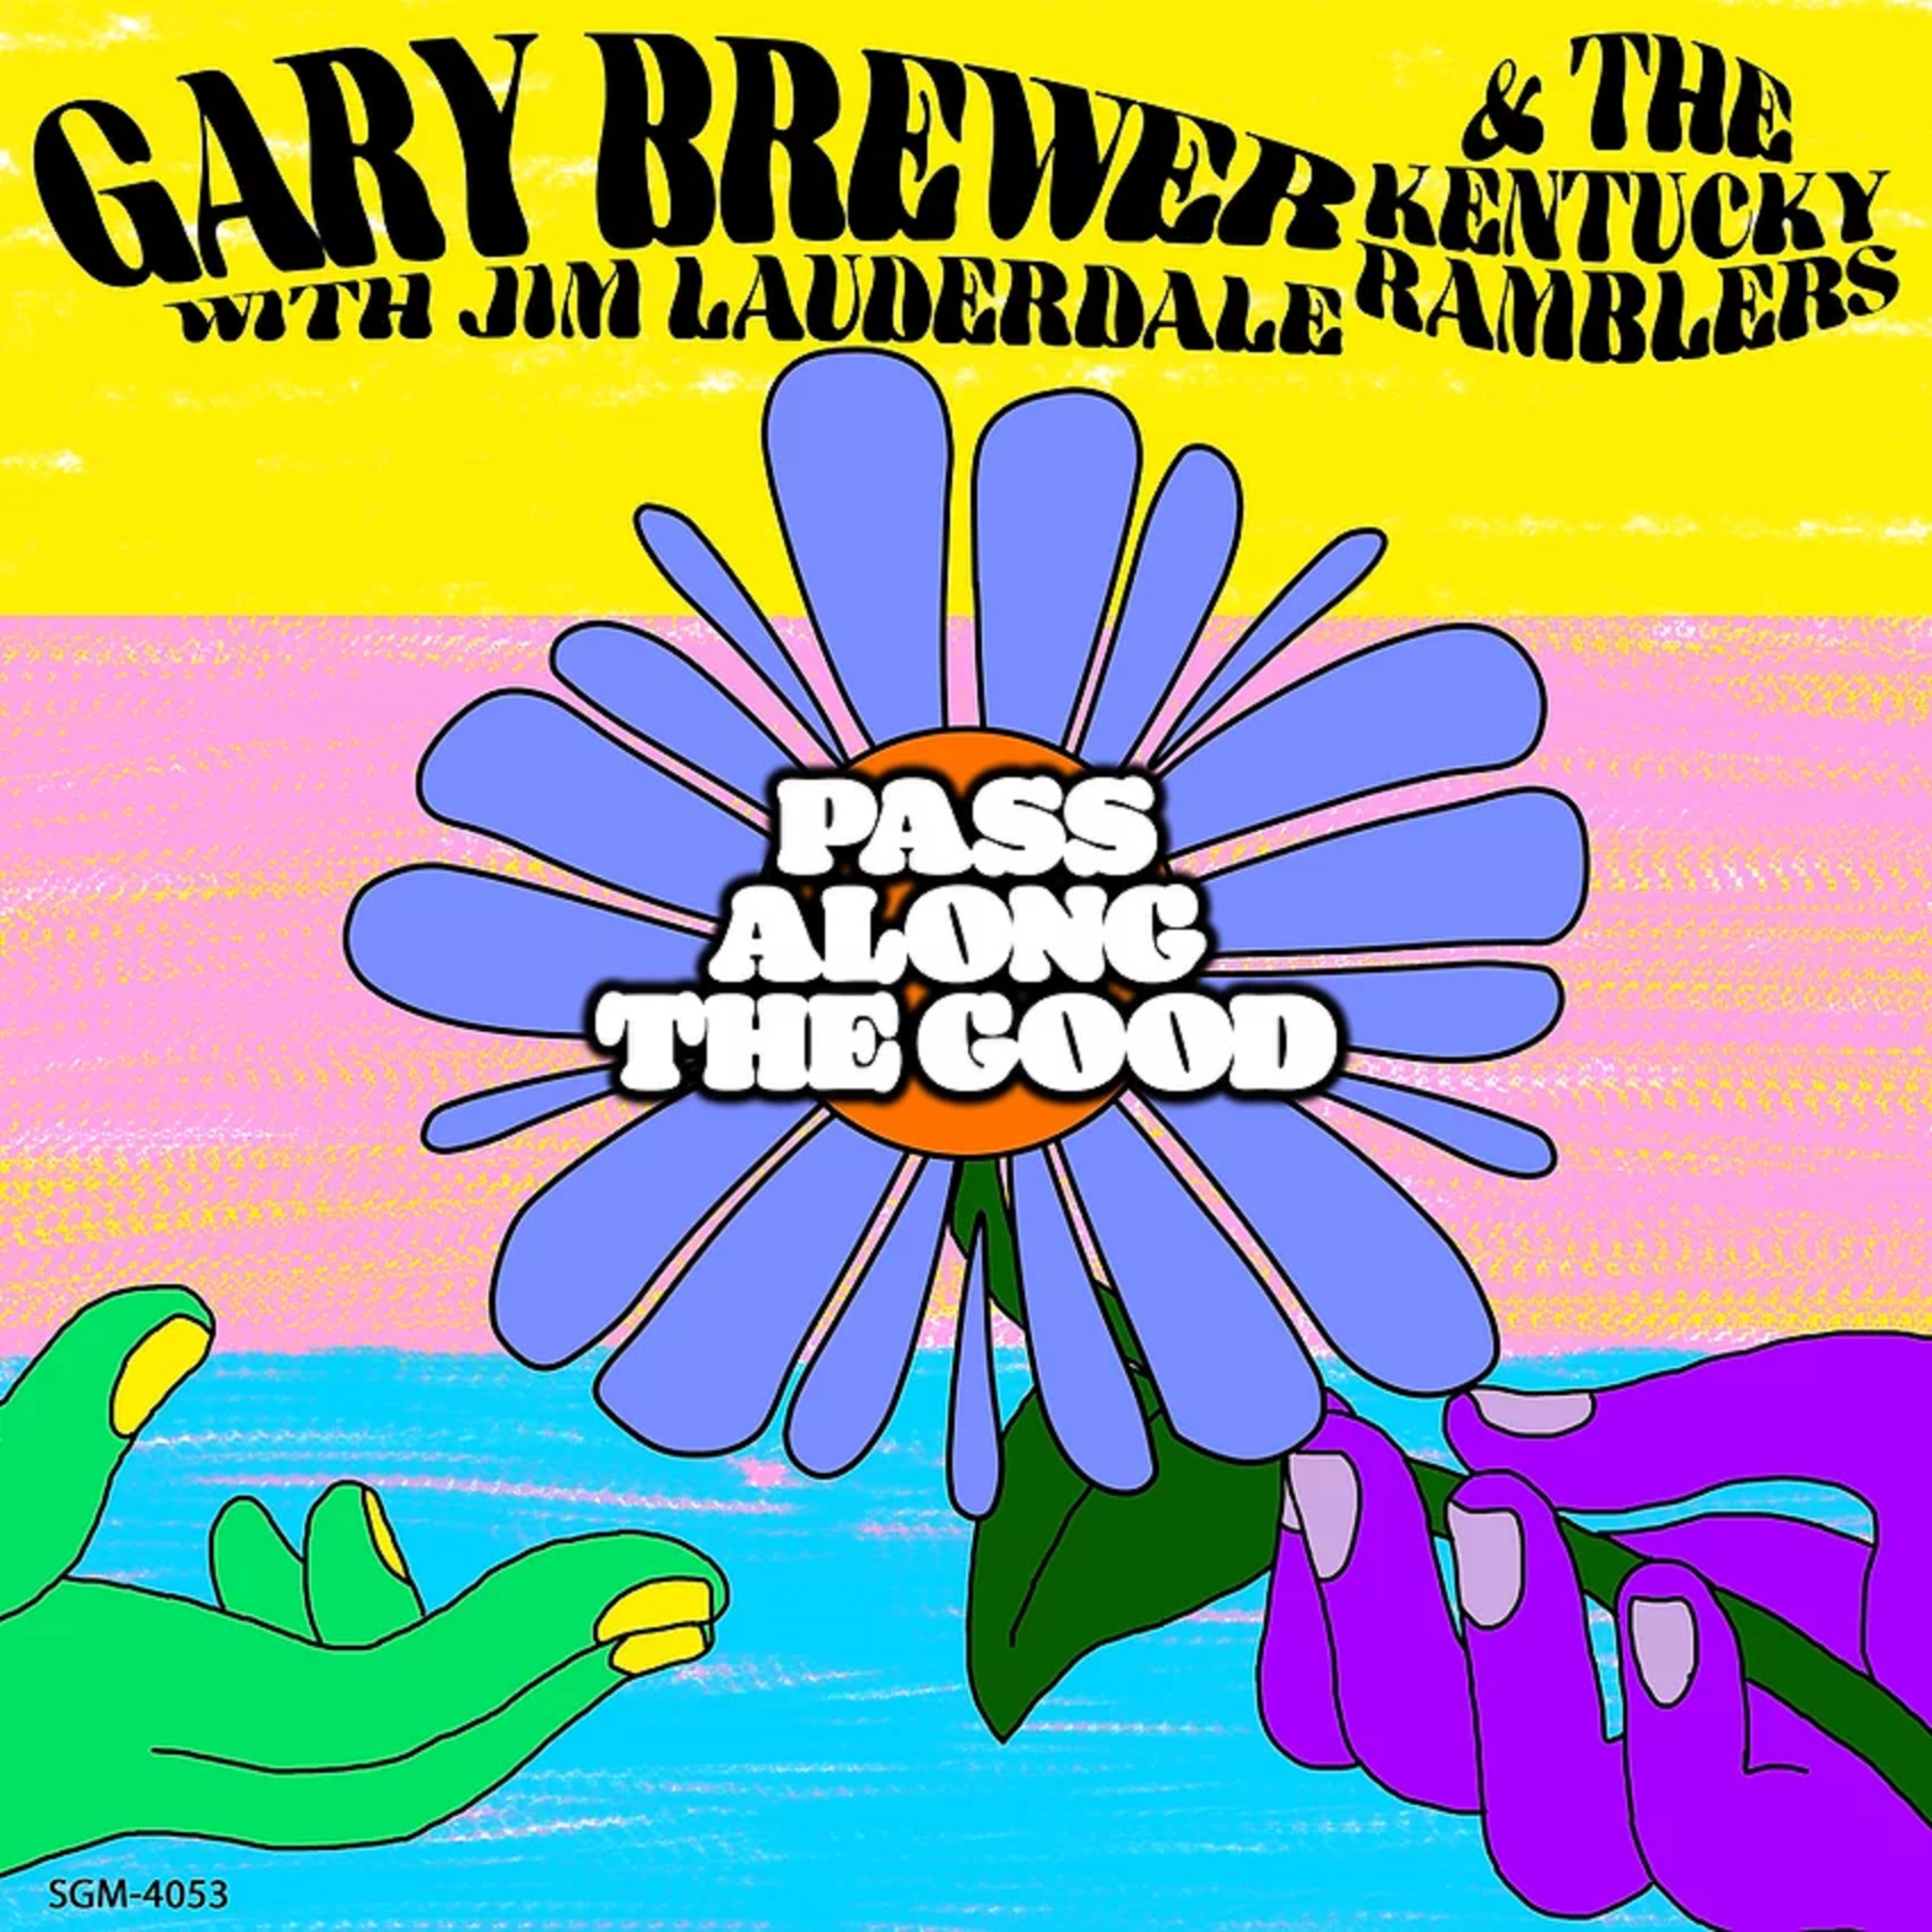 New Single from Jim Lauderdale and Gary Brewer